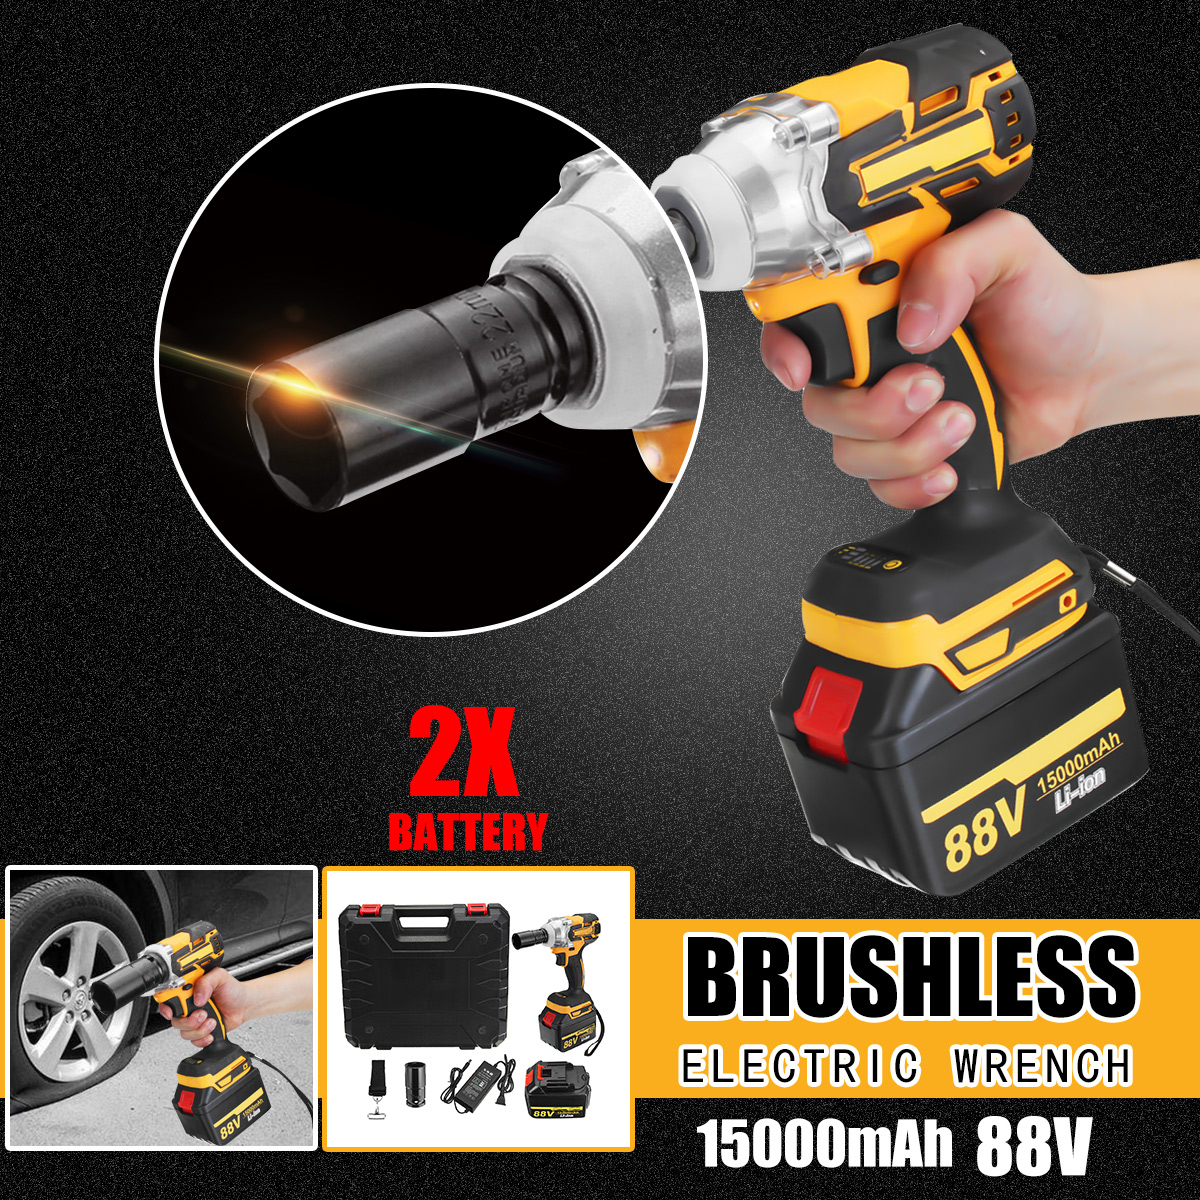 88V-15000mAh-Electric-Wrench-2-Batteries-1-Charger-Brushless-Cordless-Drive-Impact-Wrench-Tools-1282967-2